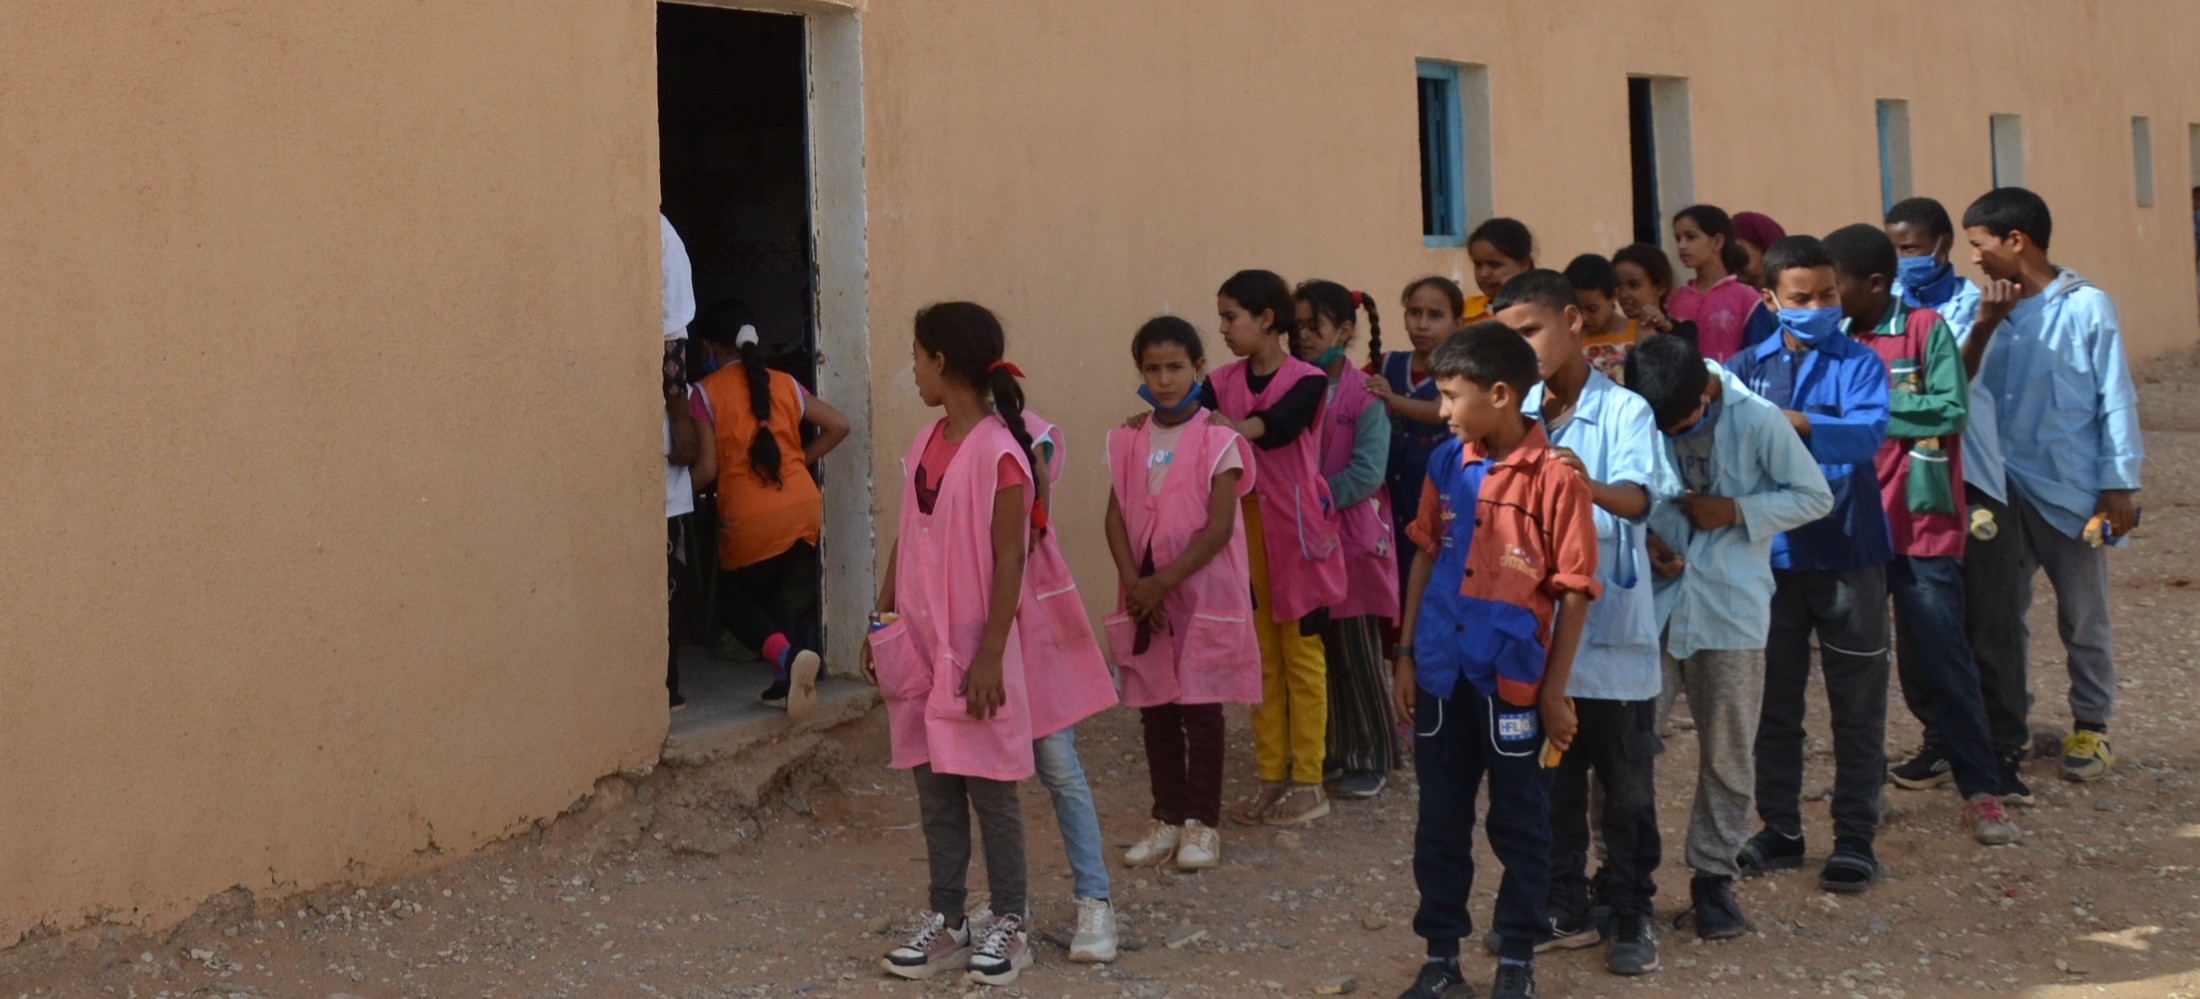 Future Saharawi generations challenged by quality education Image 1